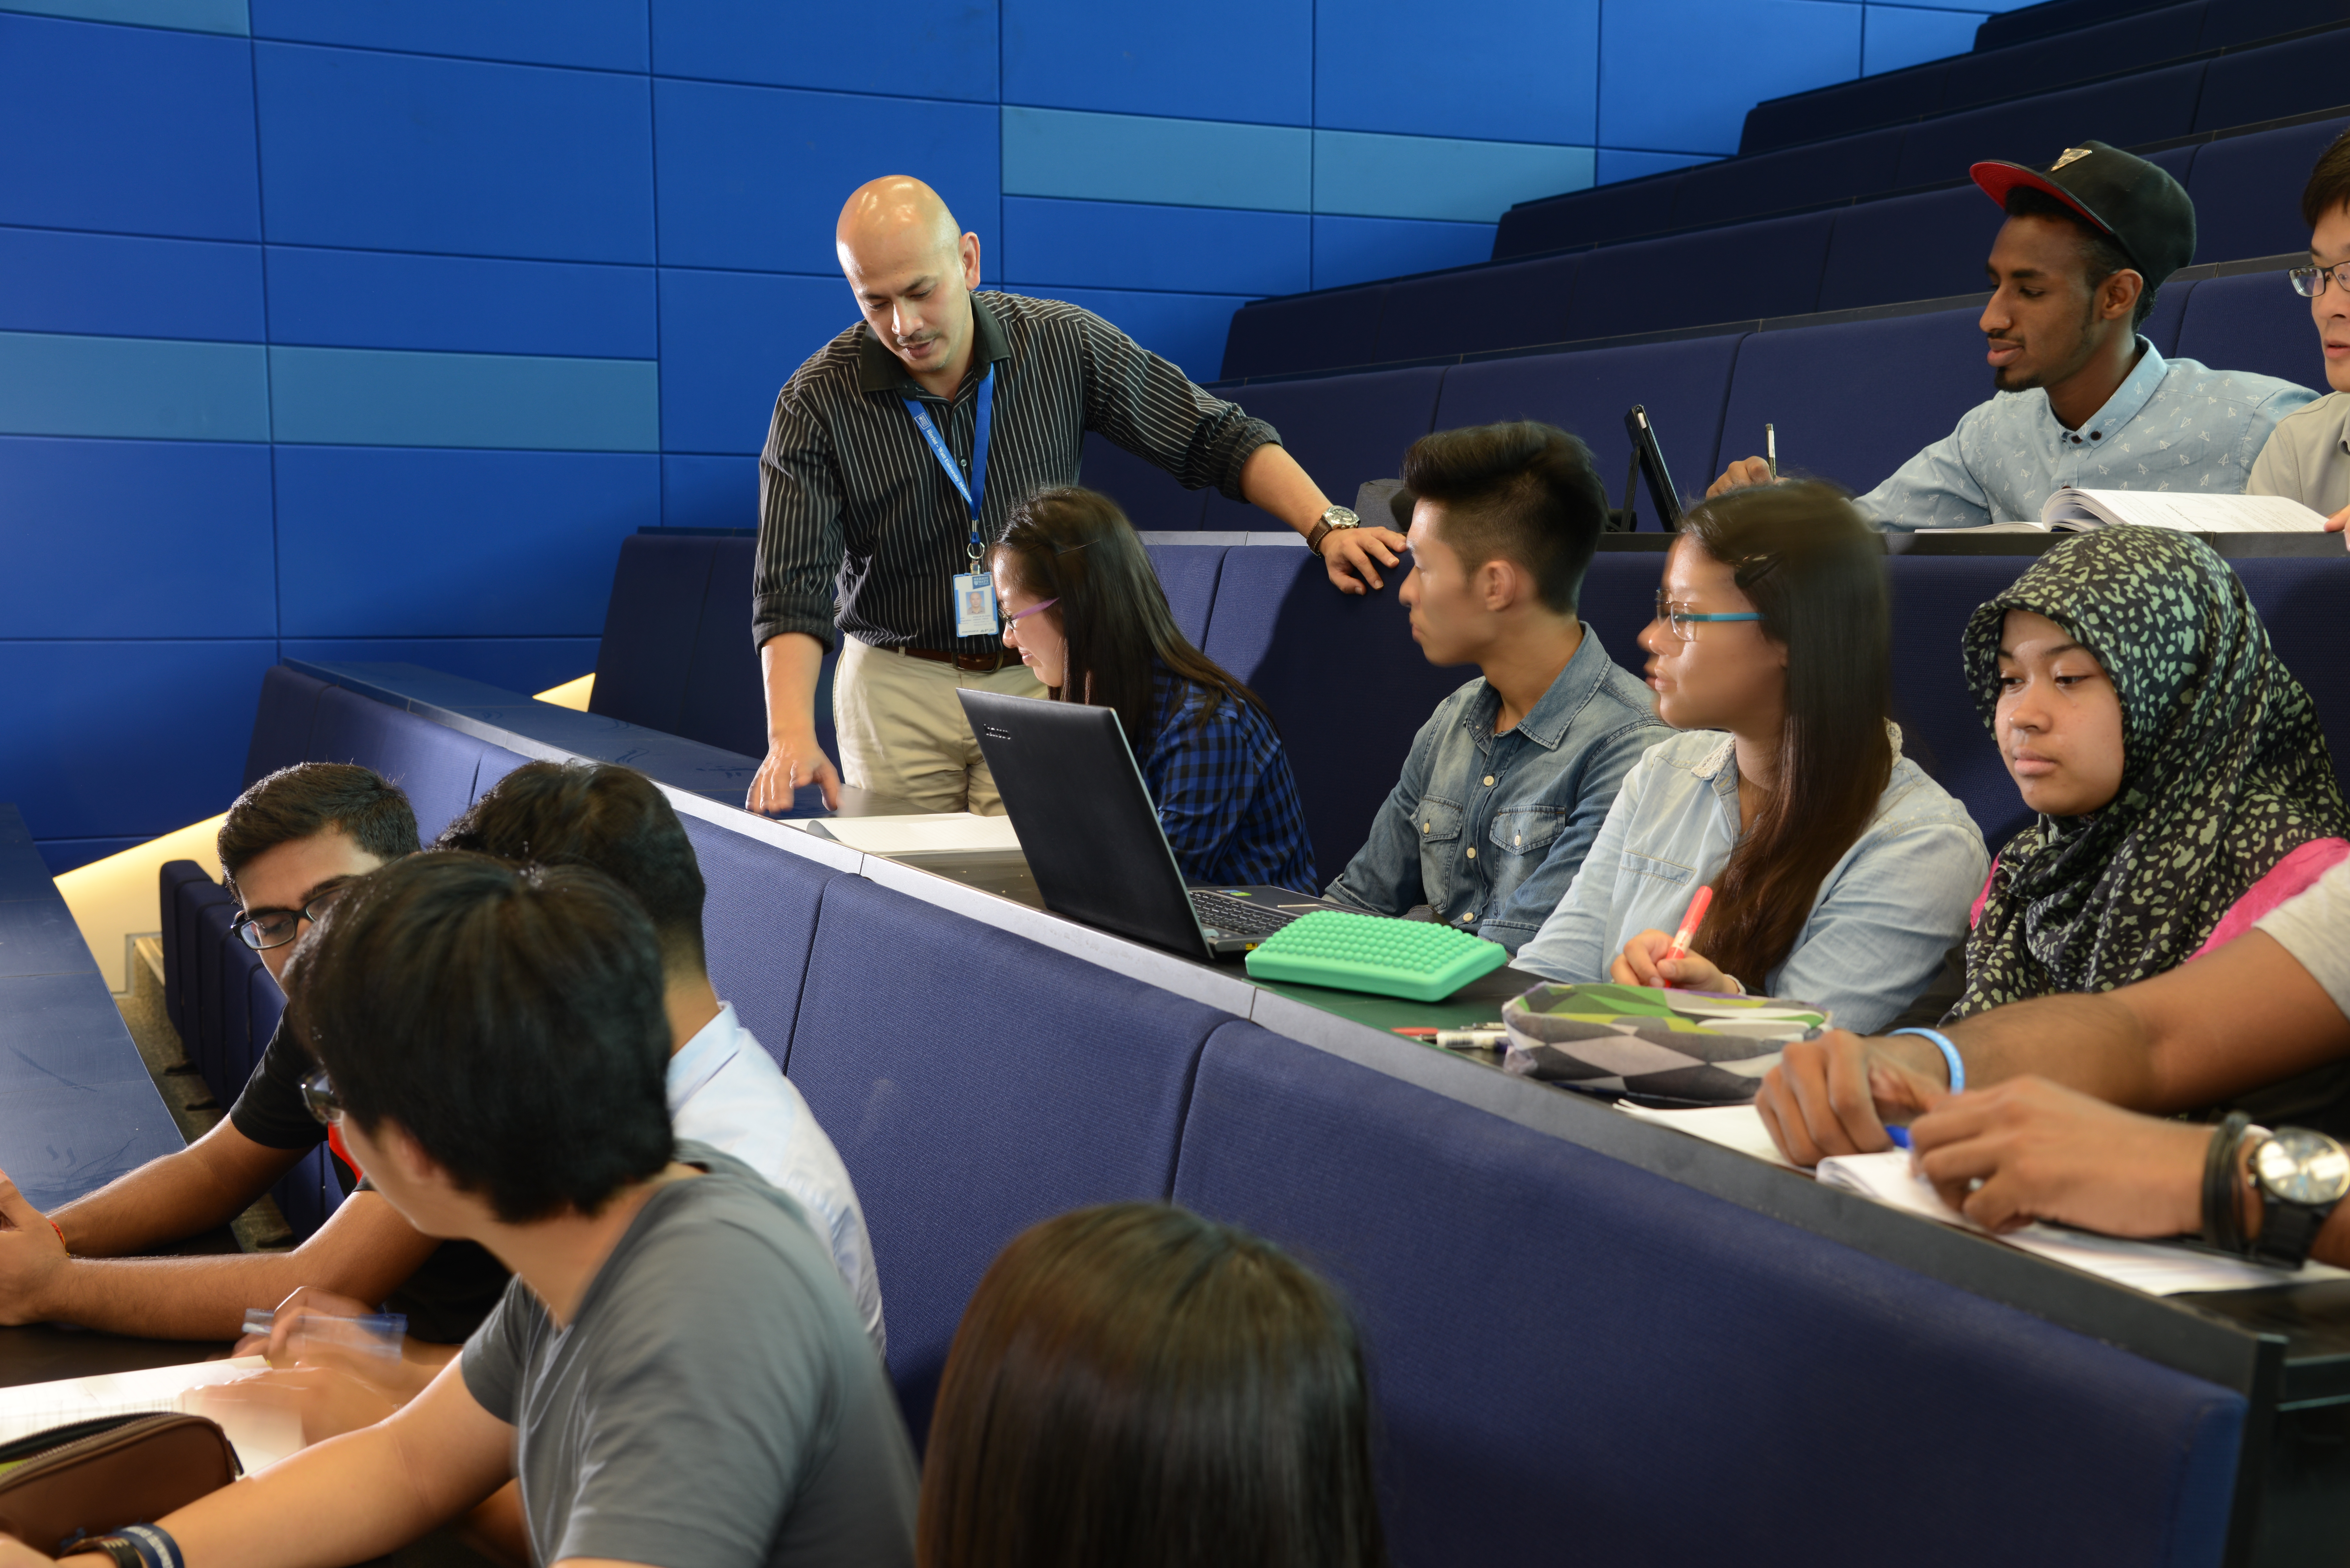 Lecture theatre at Heriot-Watt University Malaysia